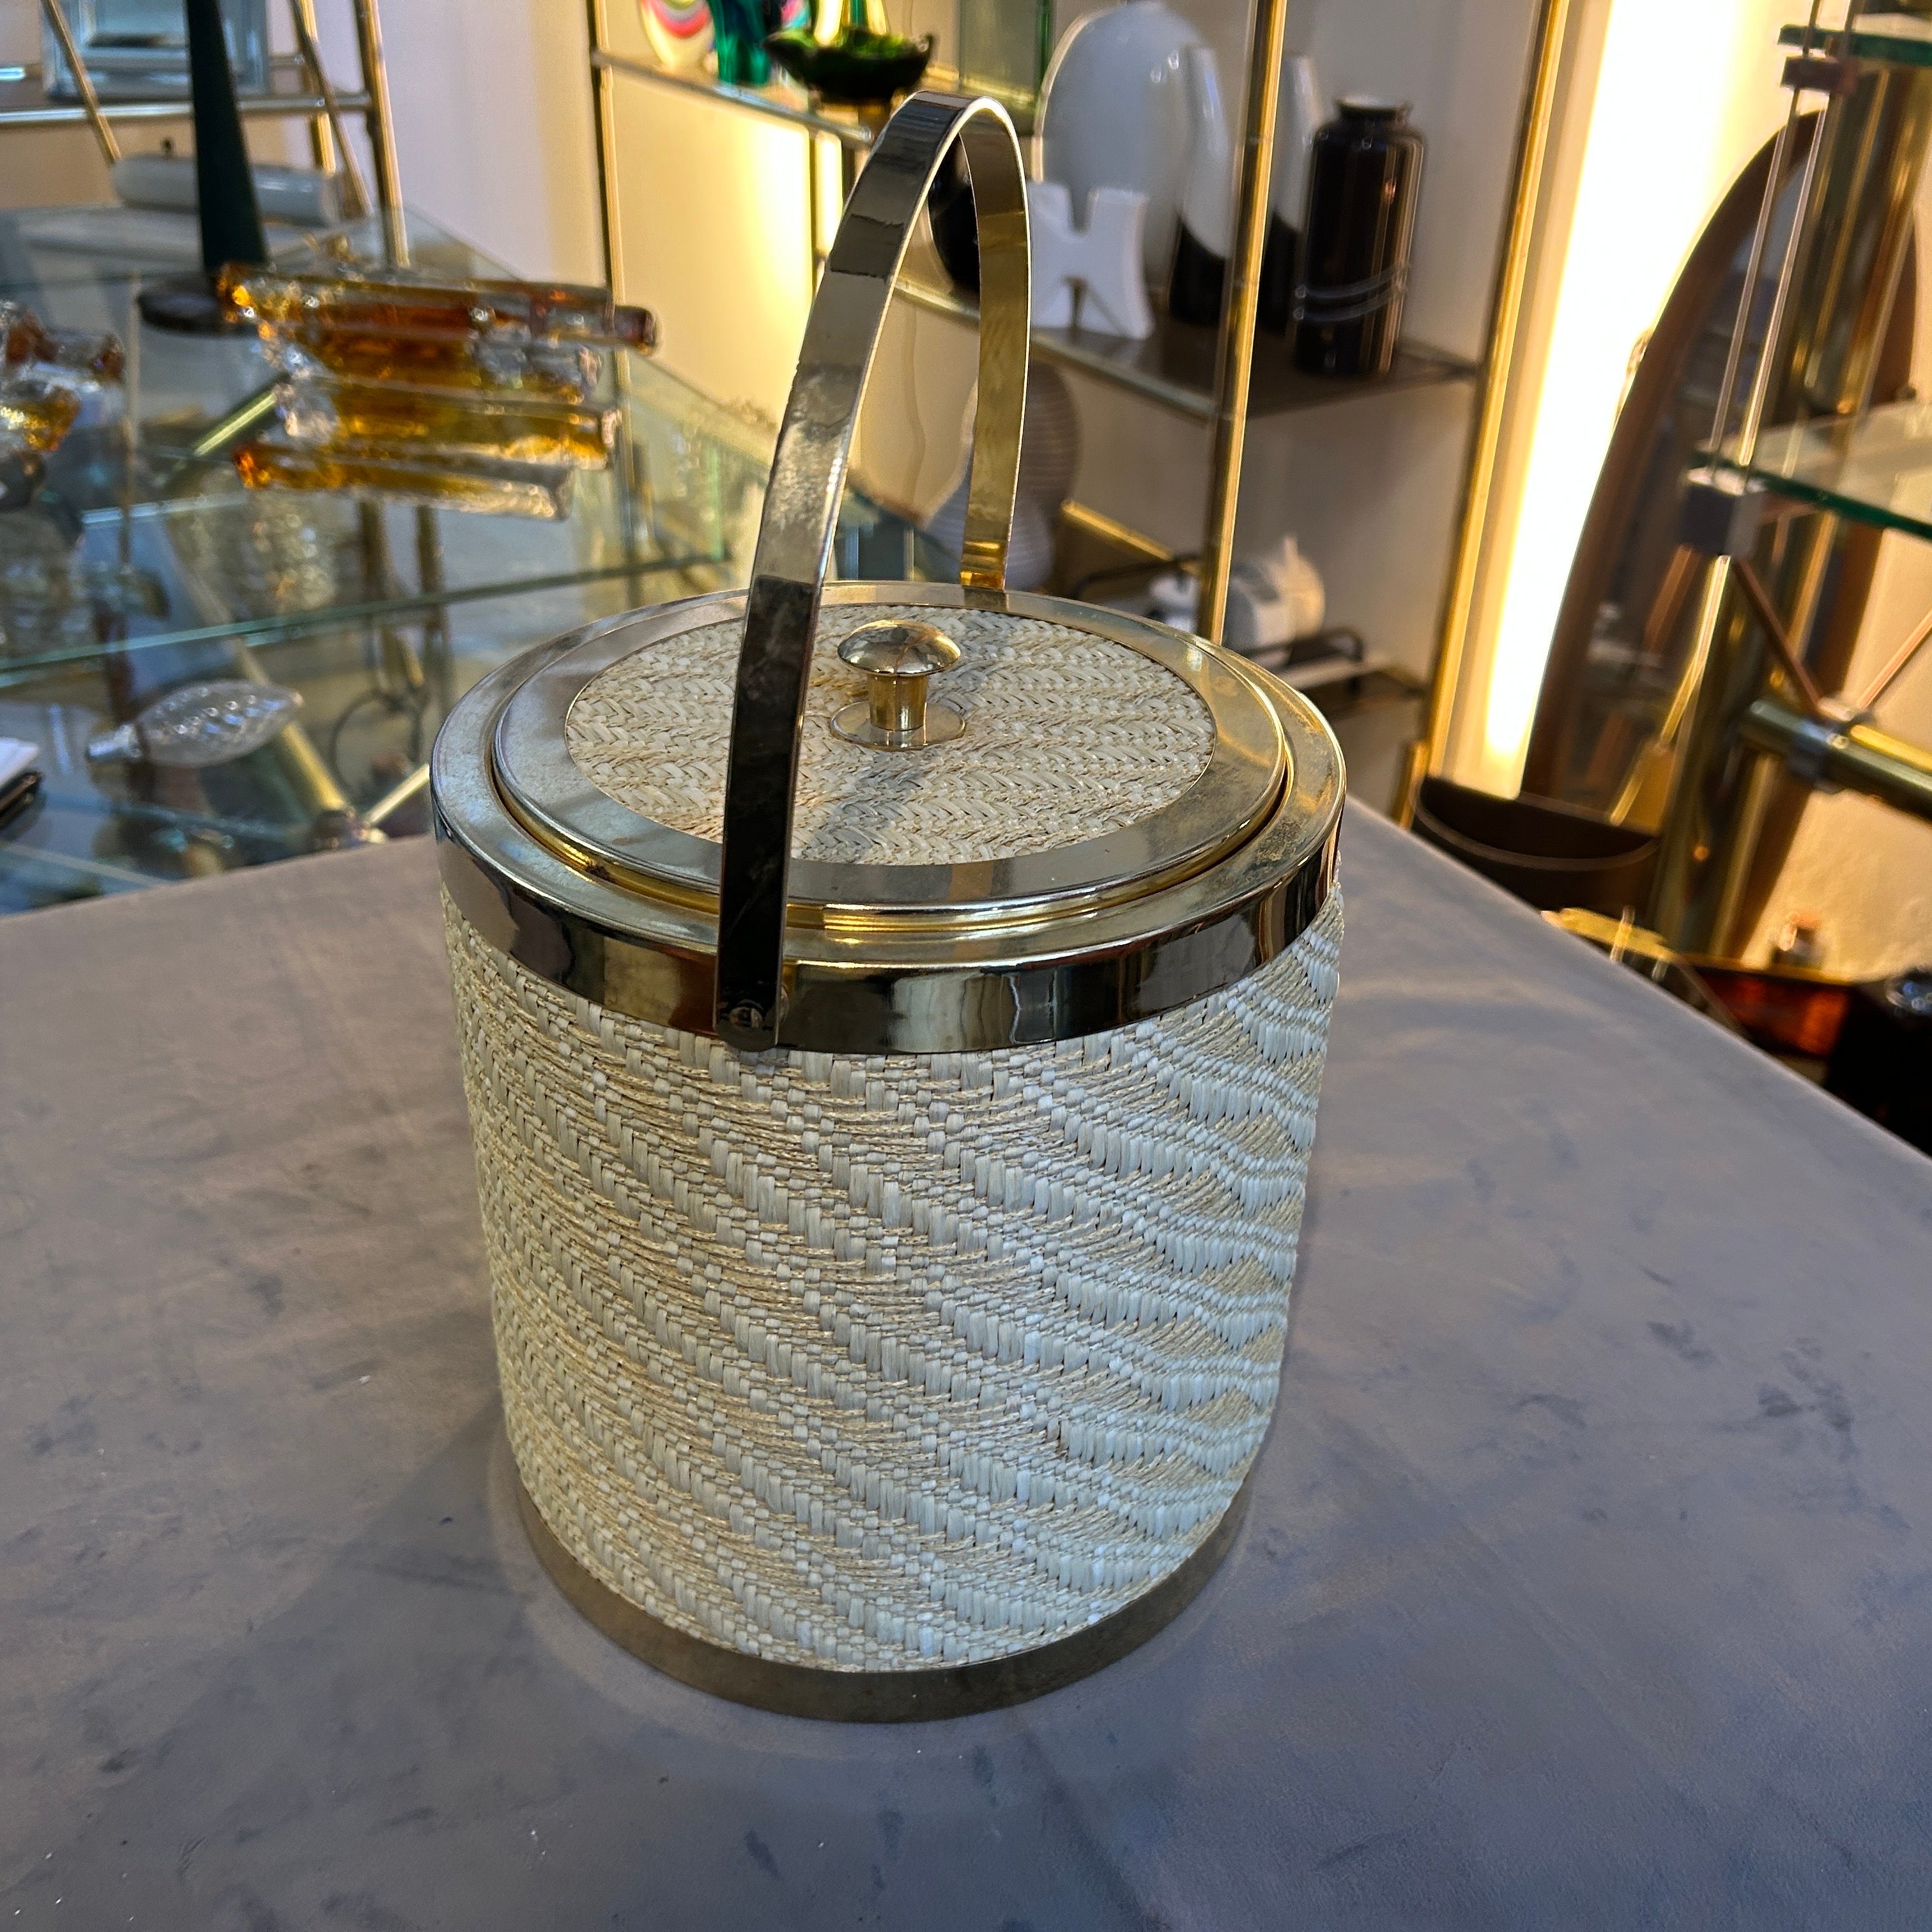 This Ice Bucket is a stylish and sophisticated piece of barware that captures the essence of its era. This ice bucket combines the sleekness of brass with the organic texture of wicker, creating a unique and eye-catching design that was highly